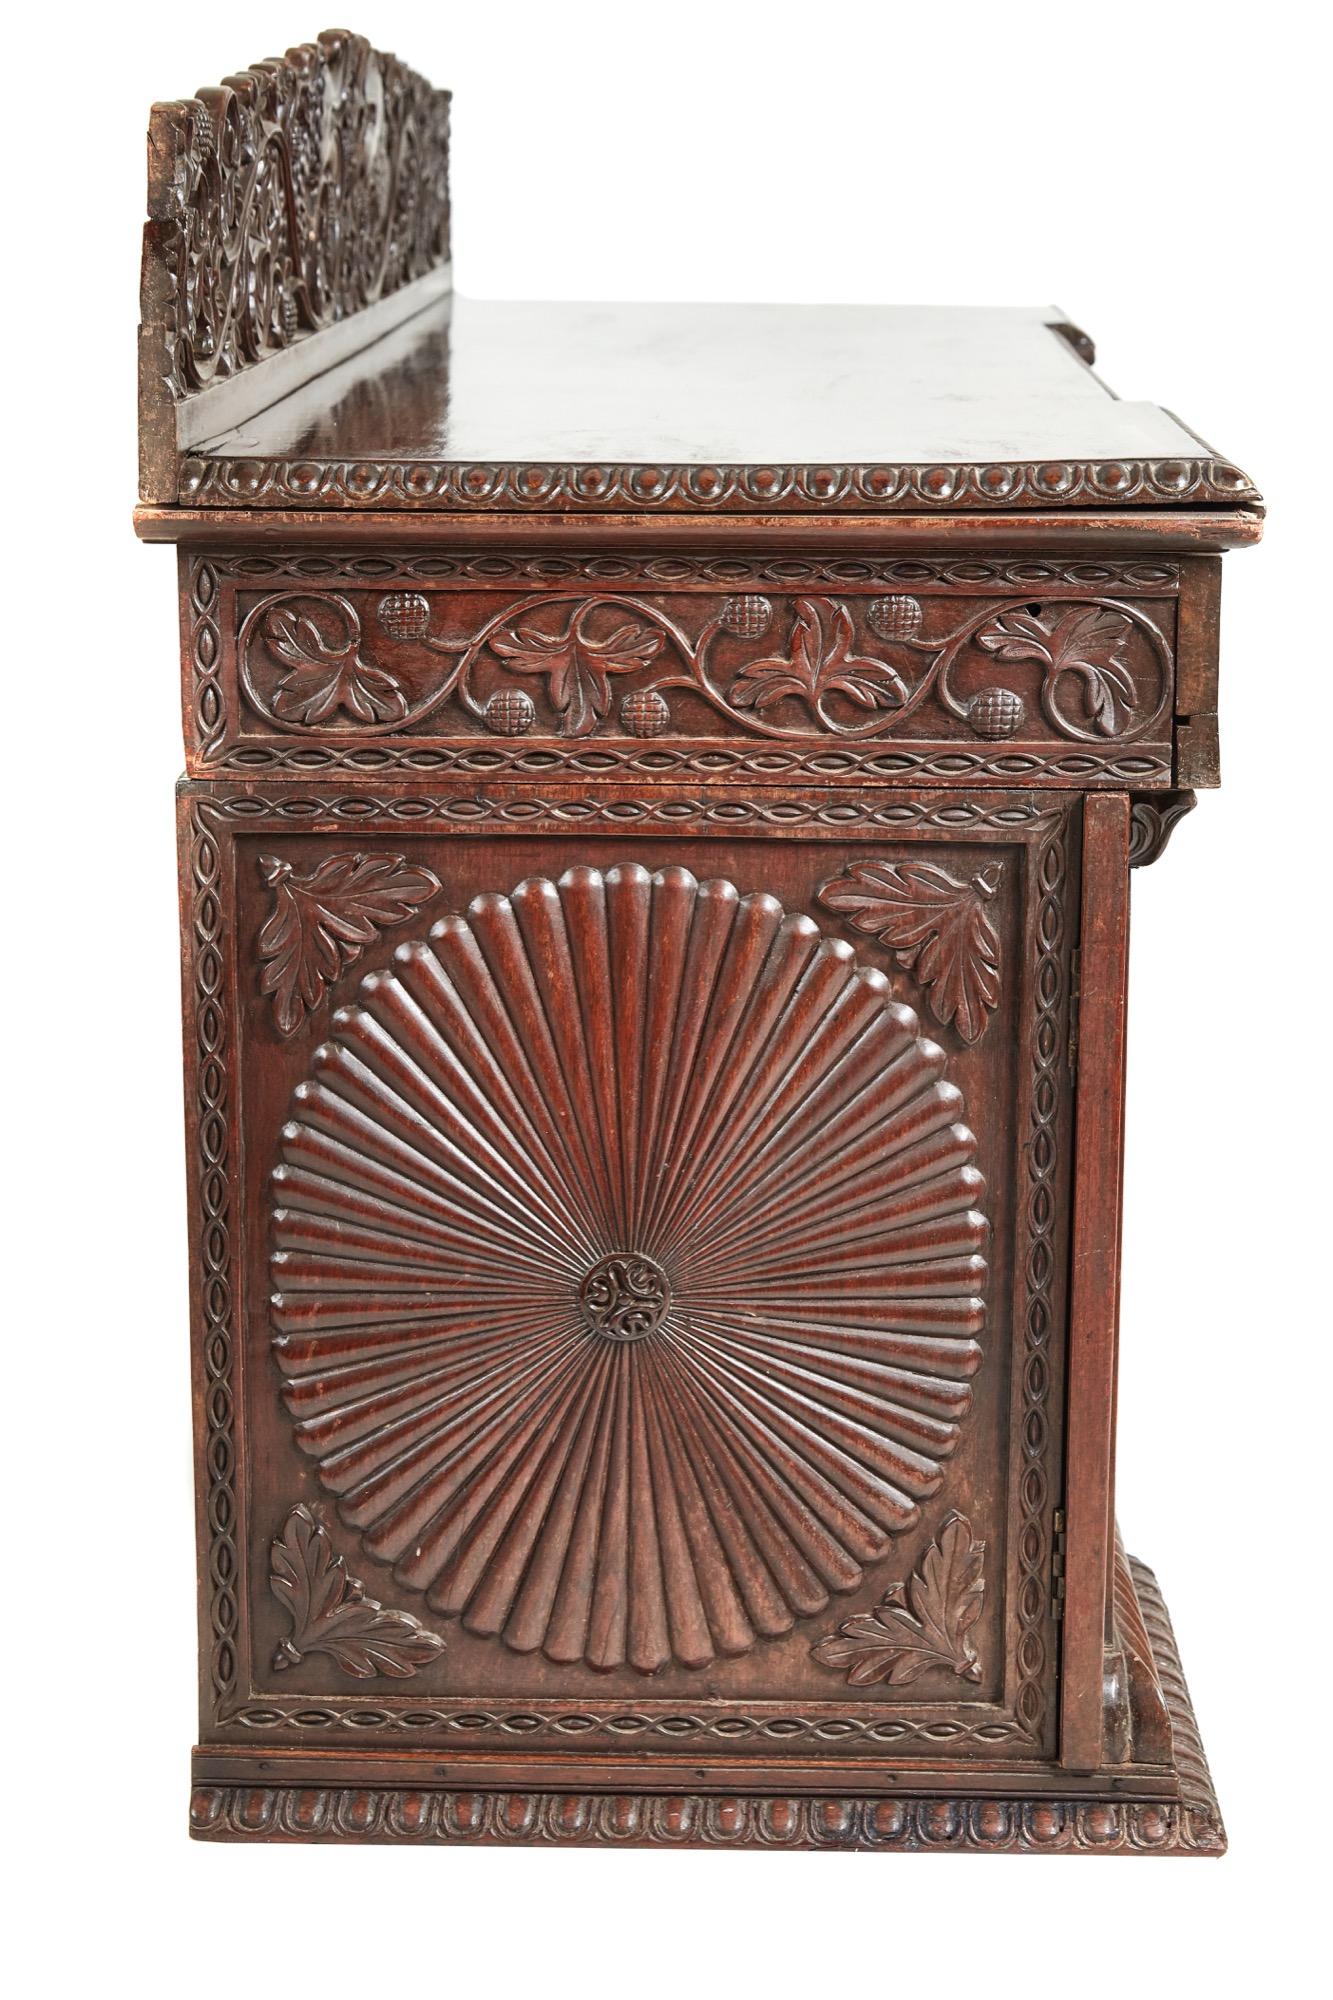 Antique Ornate Small Carved Anglo-Indian Padouk Pedestal Sideboard In Excellent Condition For Sale In Suffolk, GB